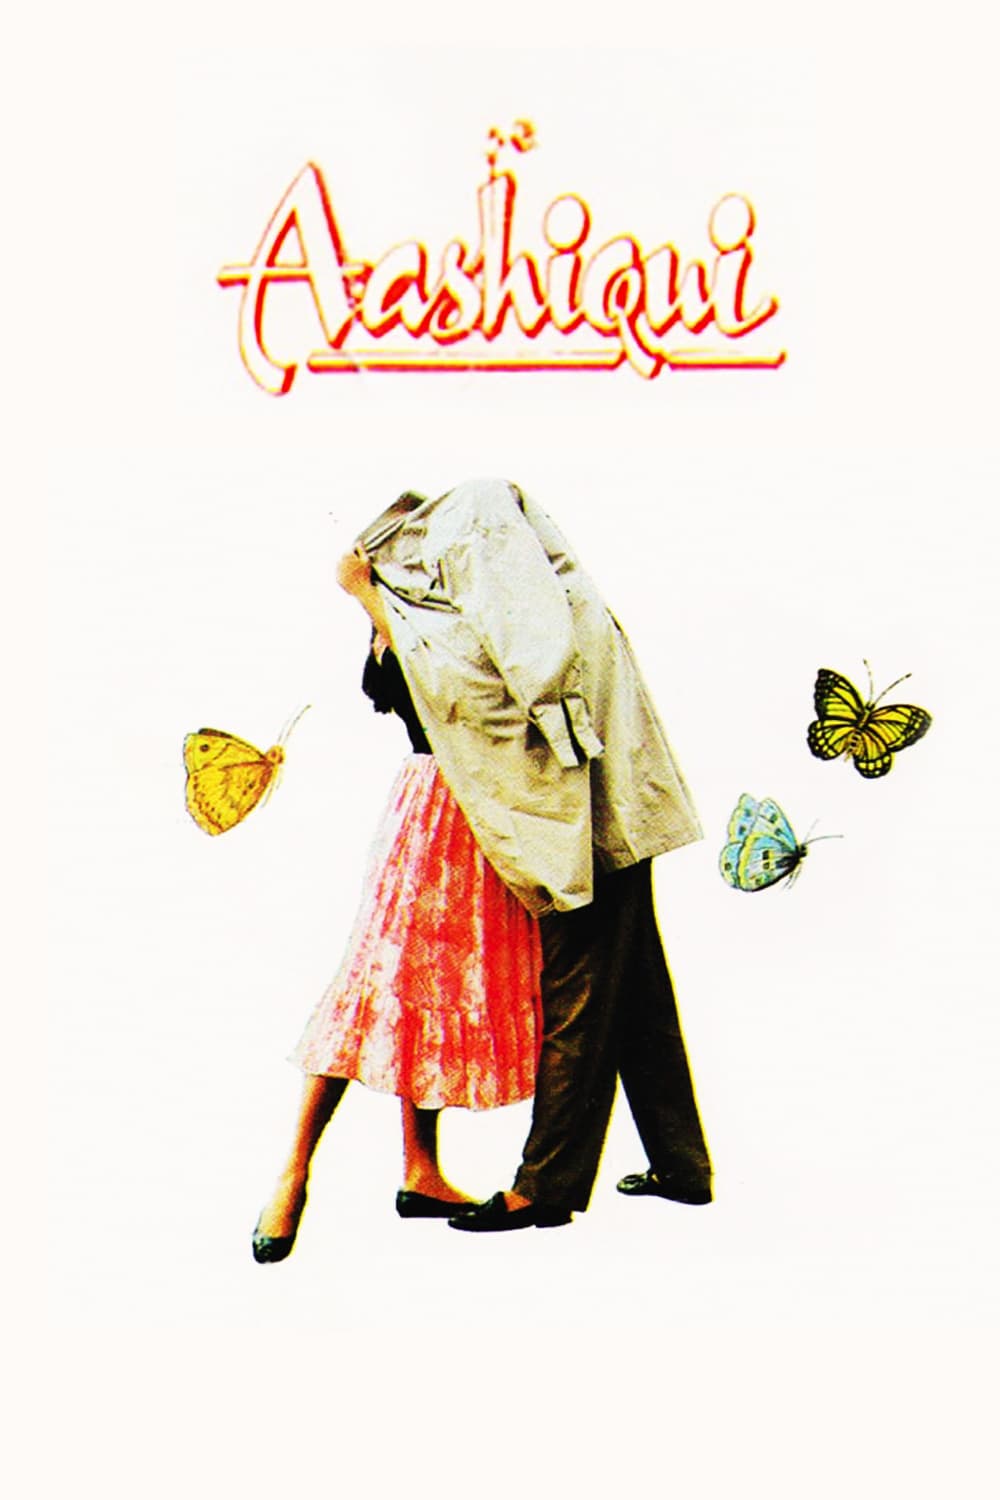 Poster for the movie "Aashiqui"